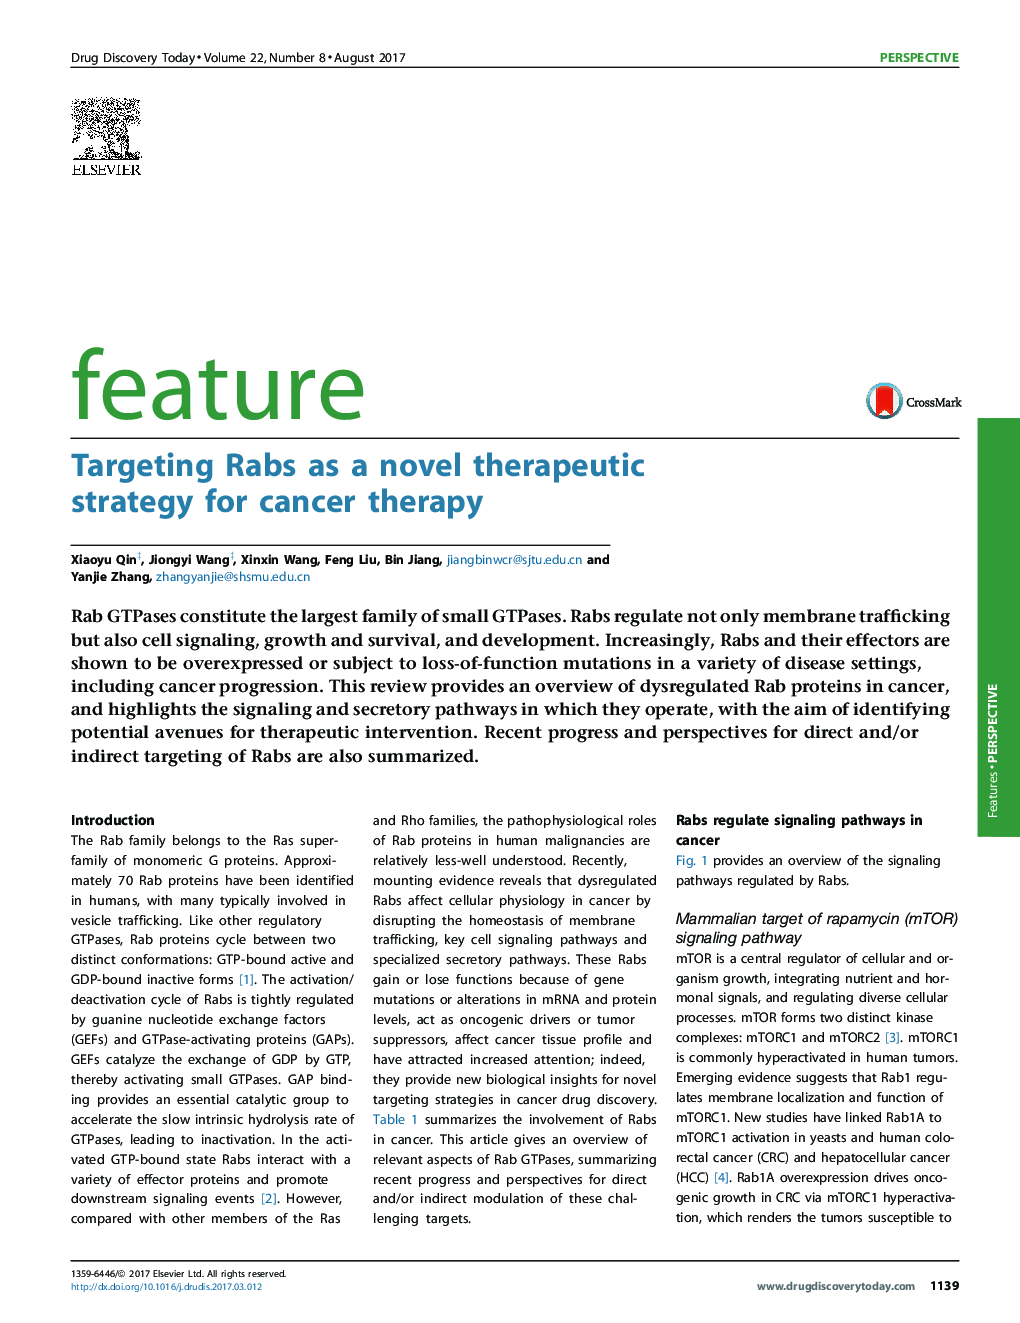 FeatureTargeting Rabs as a novel therapeutic strategy for cancer therapy